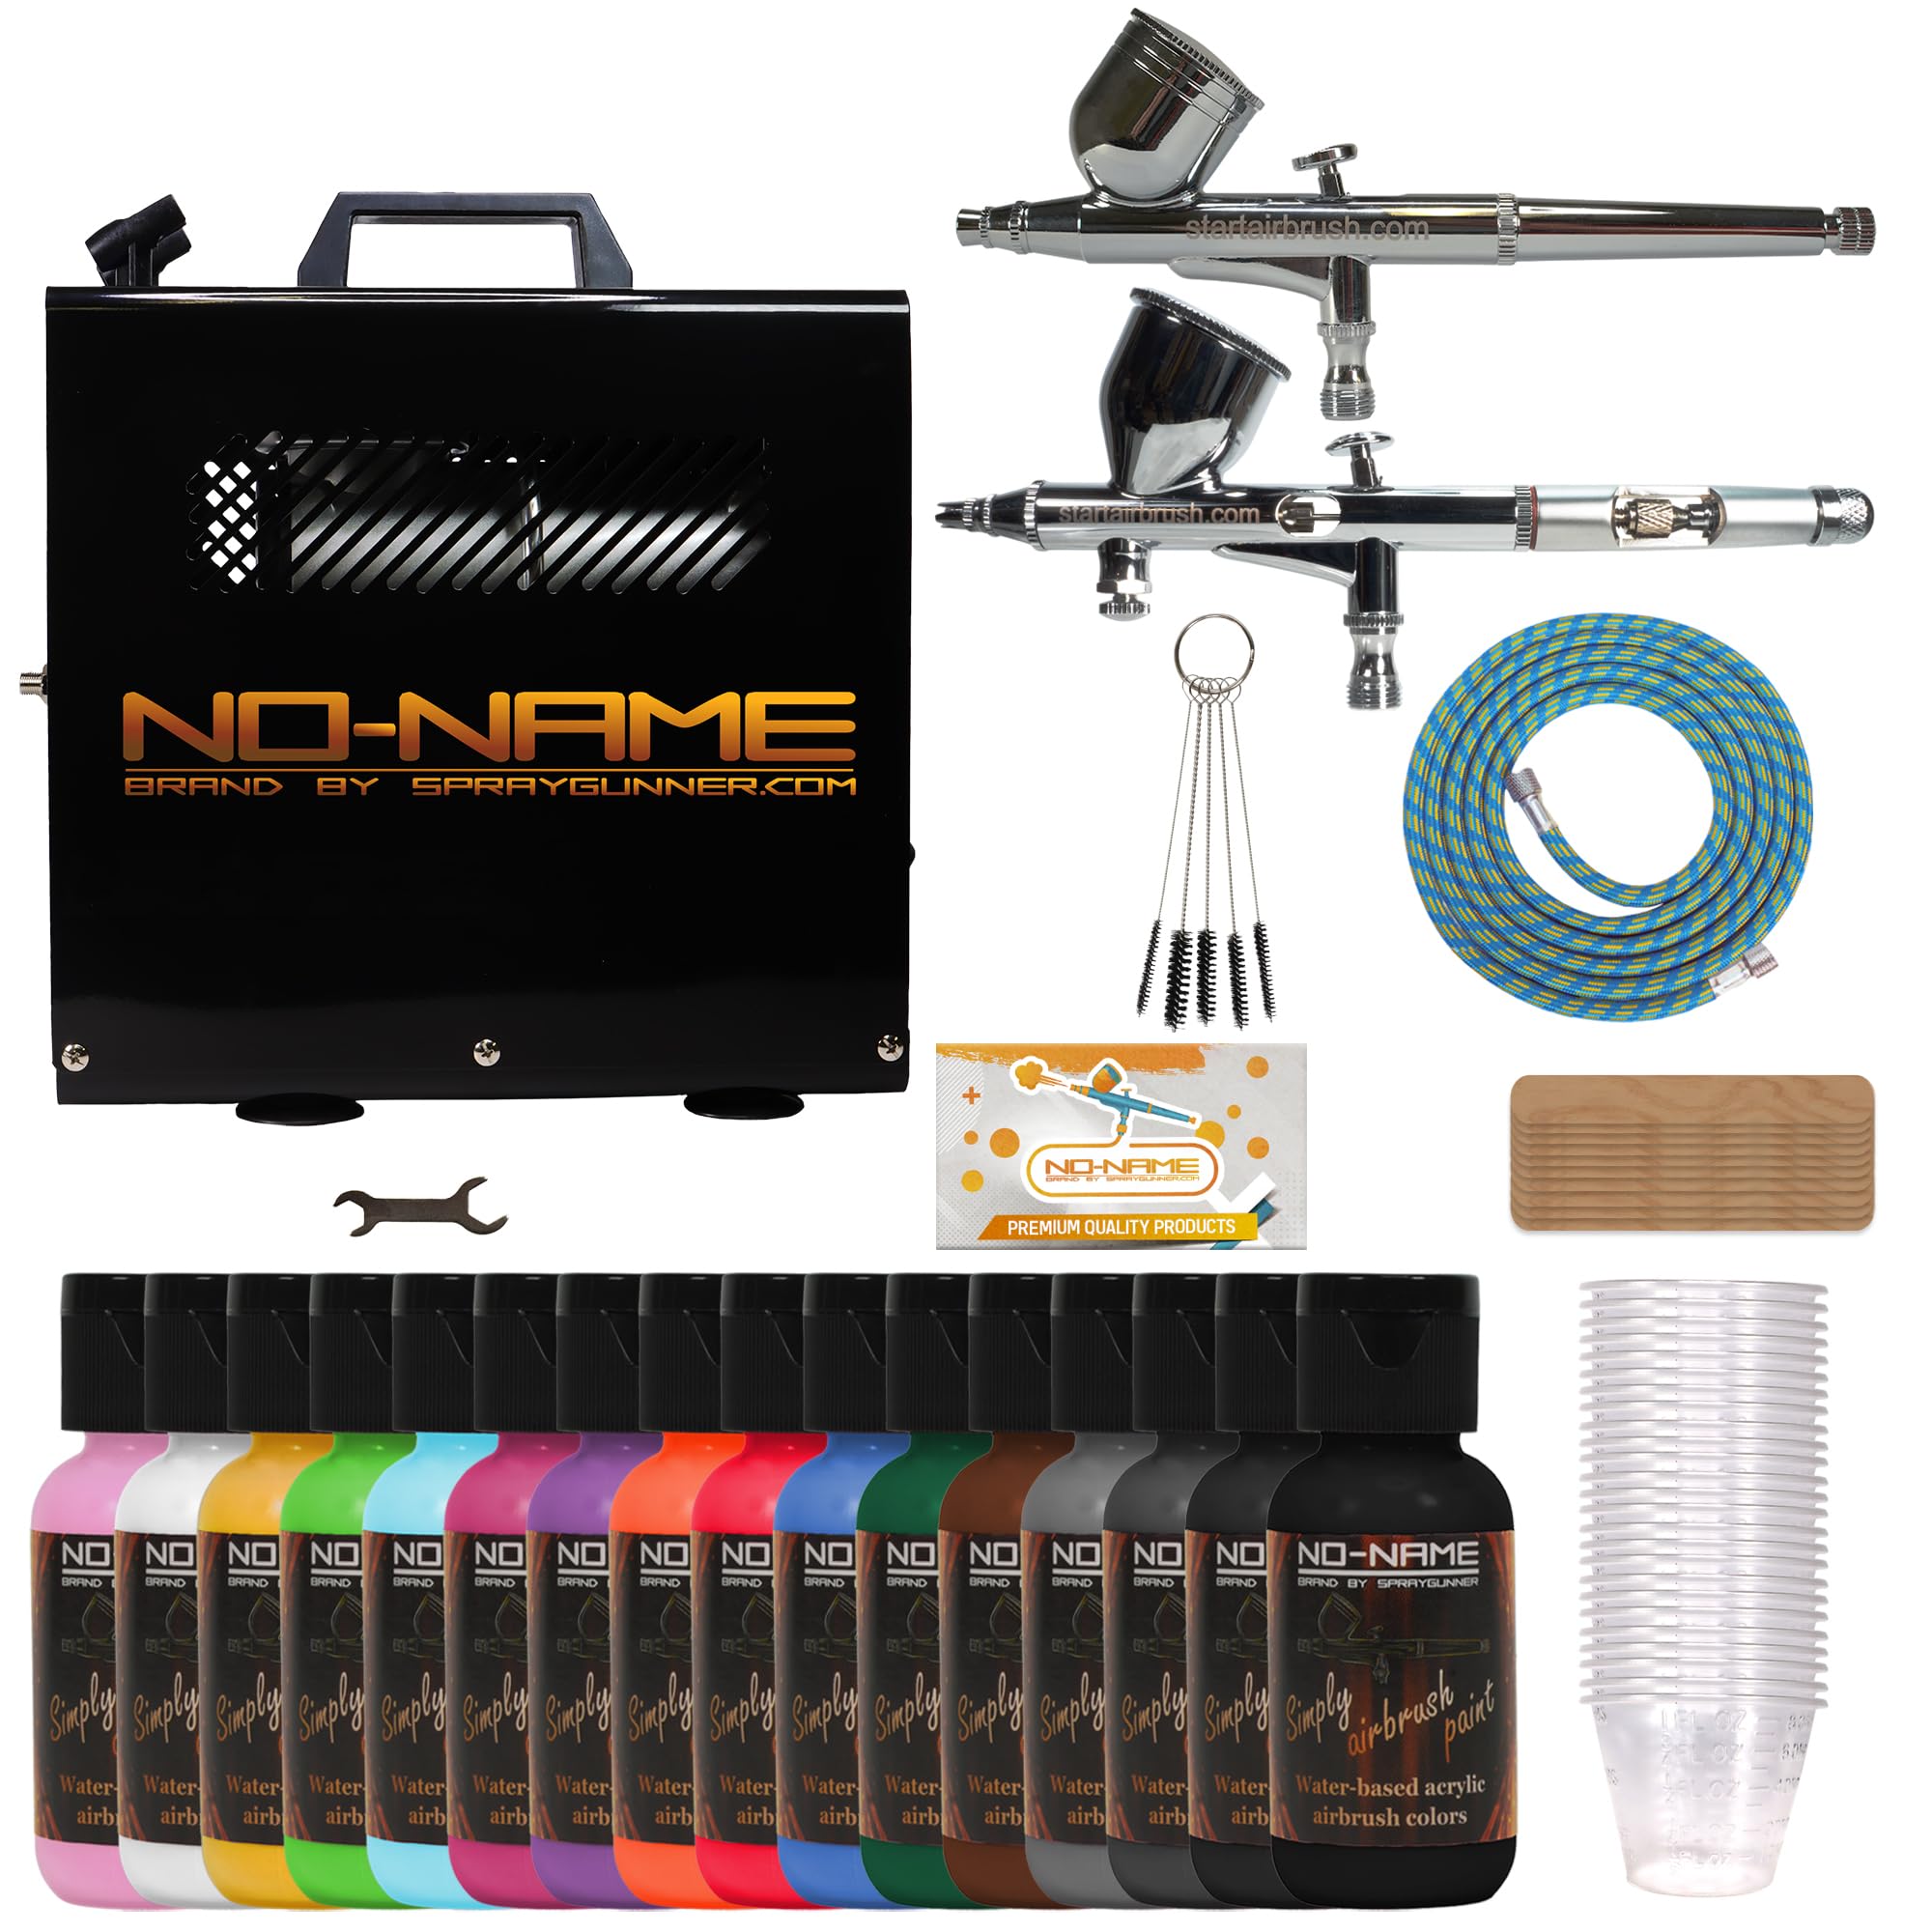 NO-NAME Brand. Airbrush Kit with Master Blaster II Compressor, Dual Action for Art, Tattoos, Cake Decor, Makeup, Nail Art - Includes Water-Based Acrylic Paints (Ultimate kit)